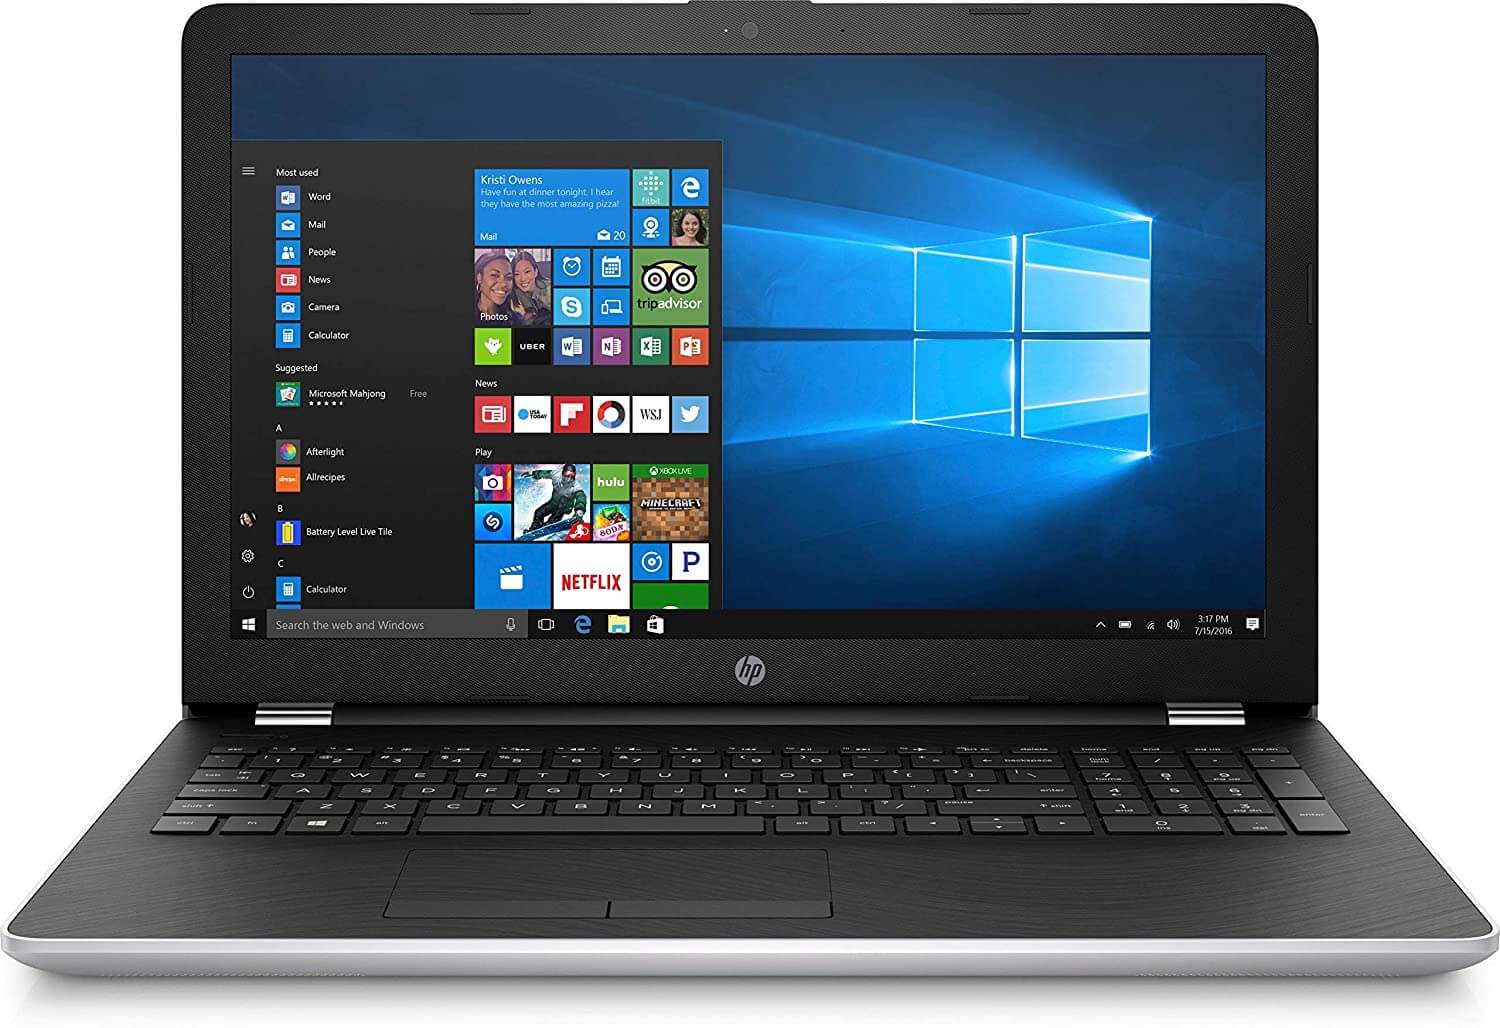 The last on our list of affordable laptops for music production, the HP Jaguar features 8GB of RAM, a TB of HDD storage, an Intel i5 processor, and a 15.6" full HD screen.